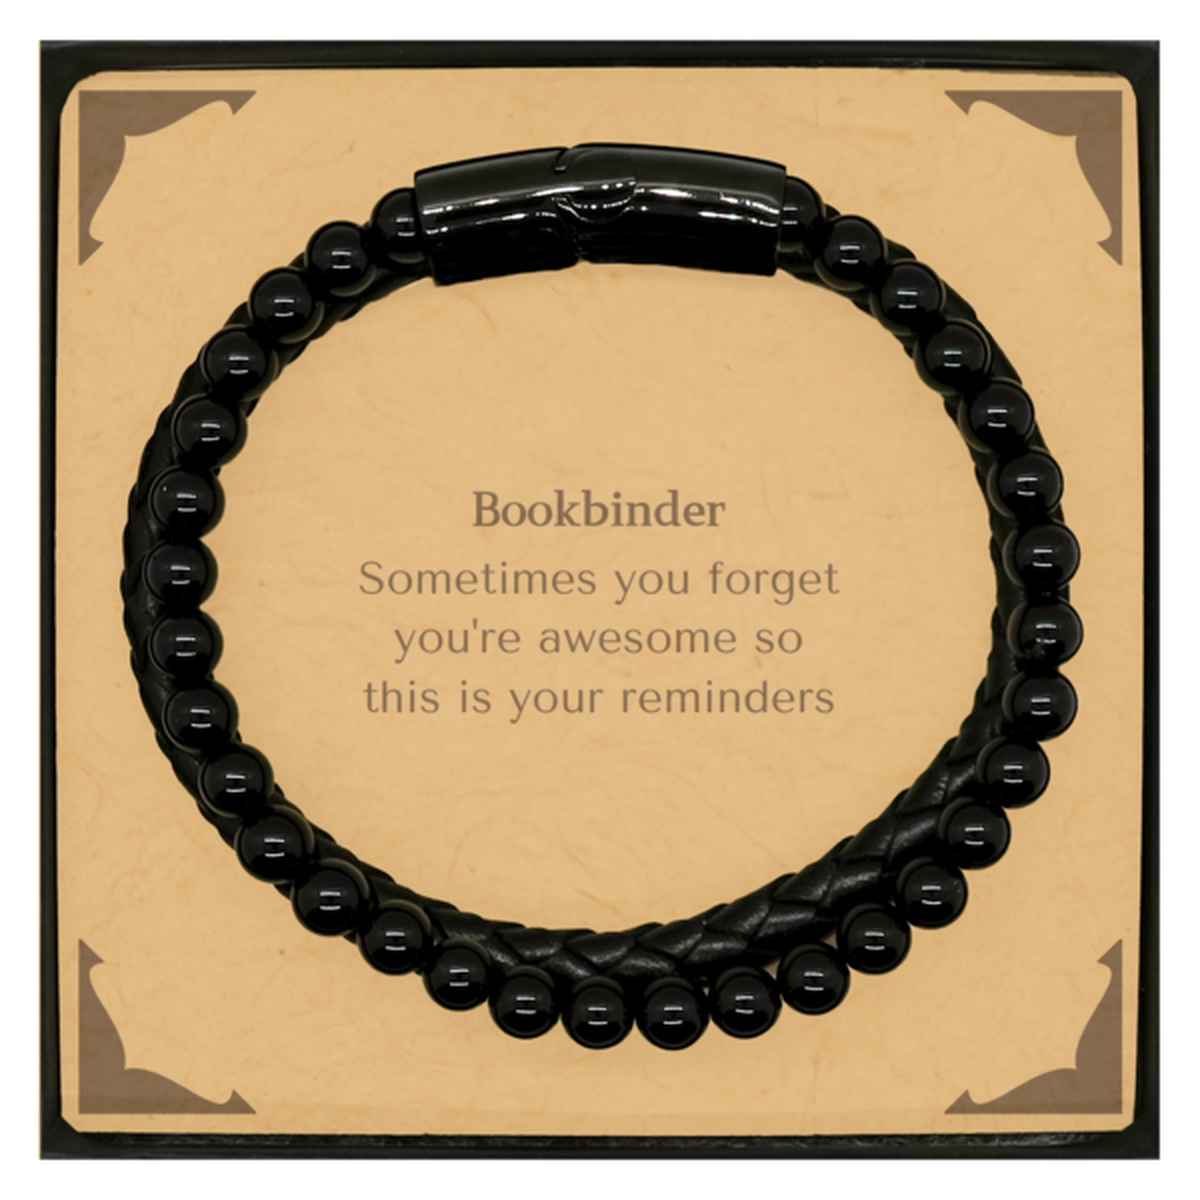 Sentimental Bookbinder Stone Leather Bracelets, Bookbinder Sometimes you forget you're awesome so this is your reminders, Graduation Christmas Birthday Gifts for Bookbinder, Men, Women, Coworkers